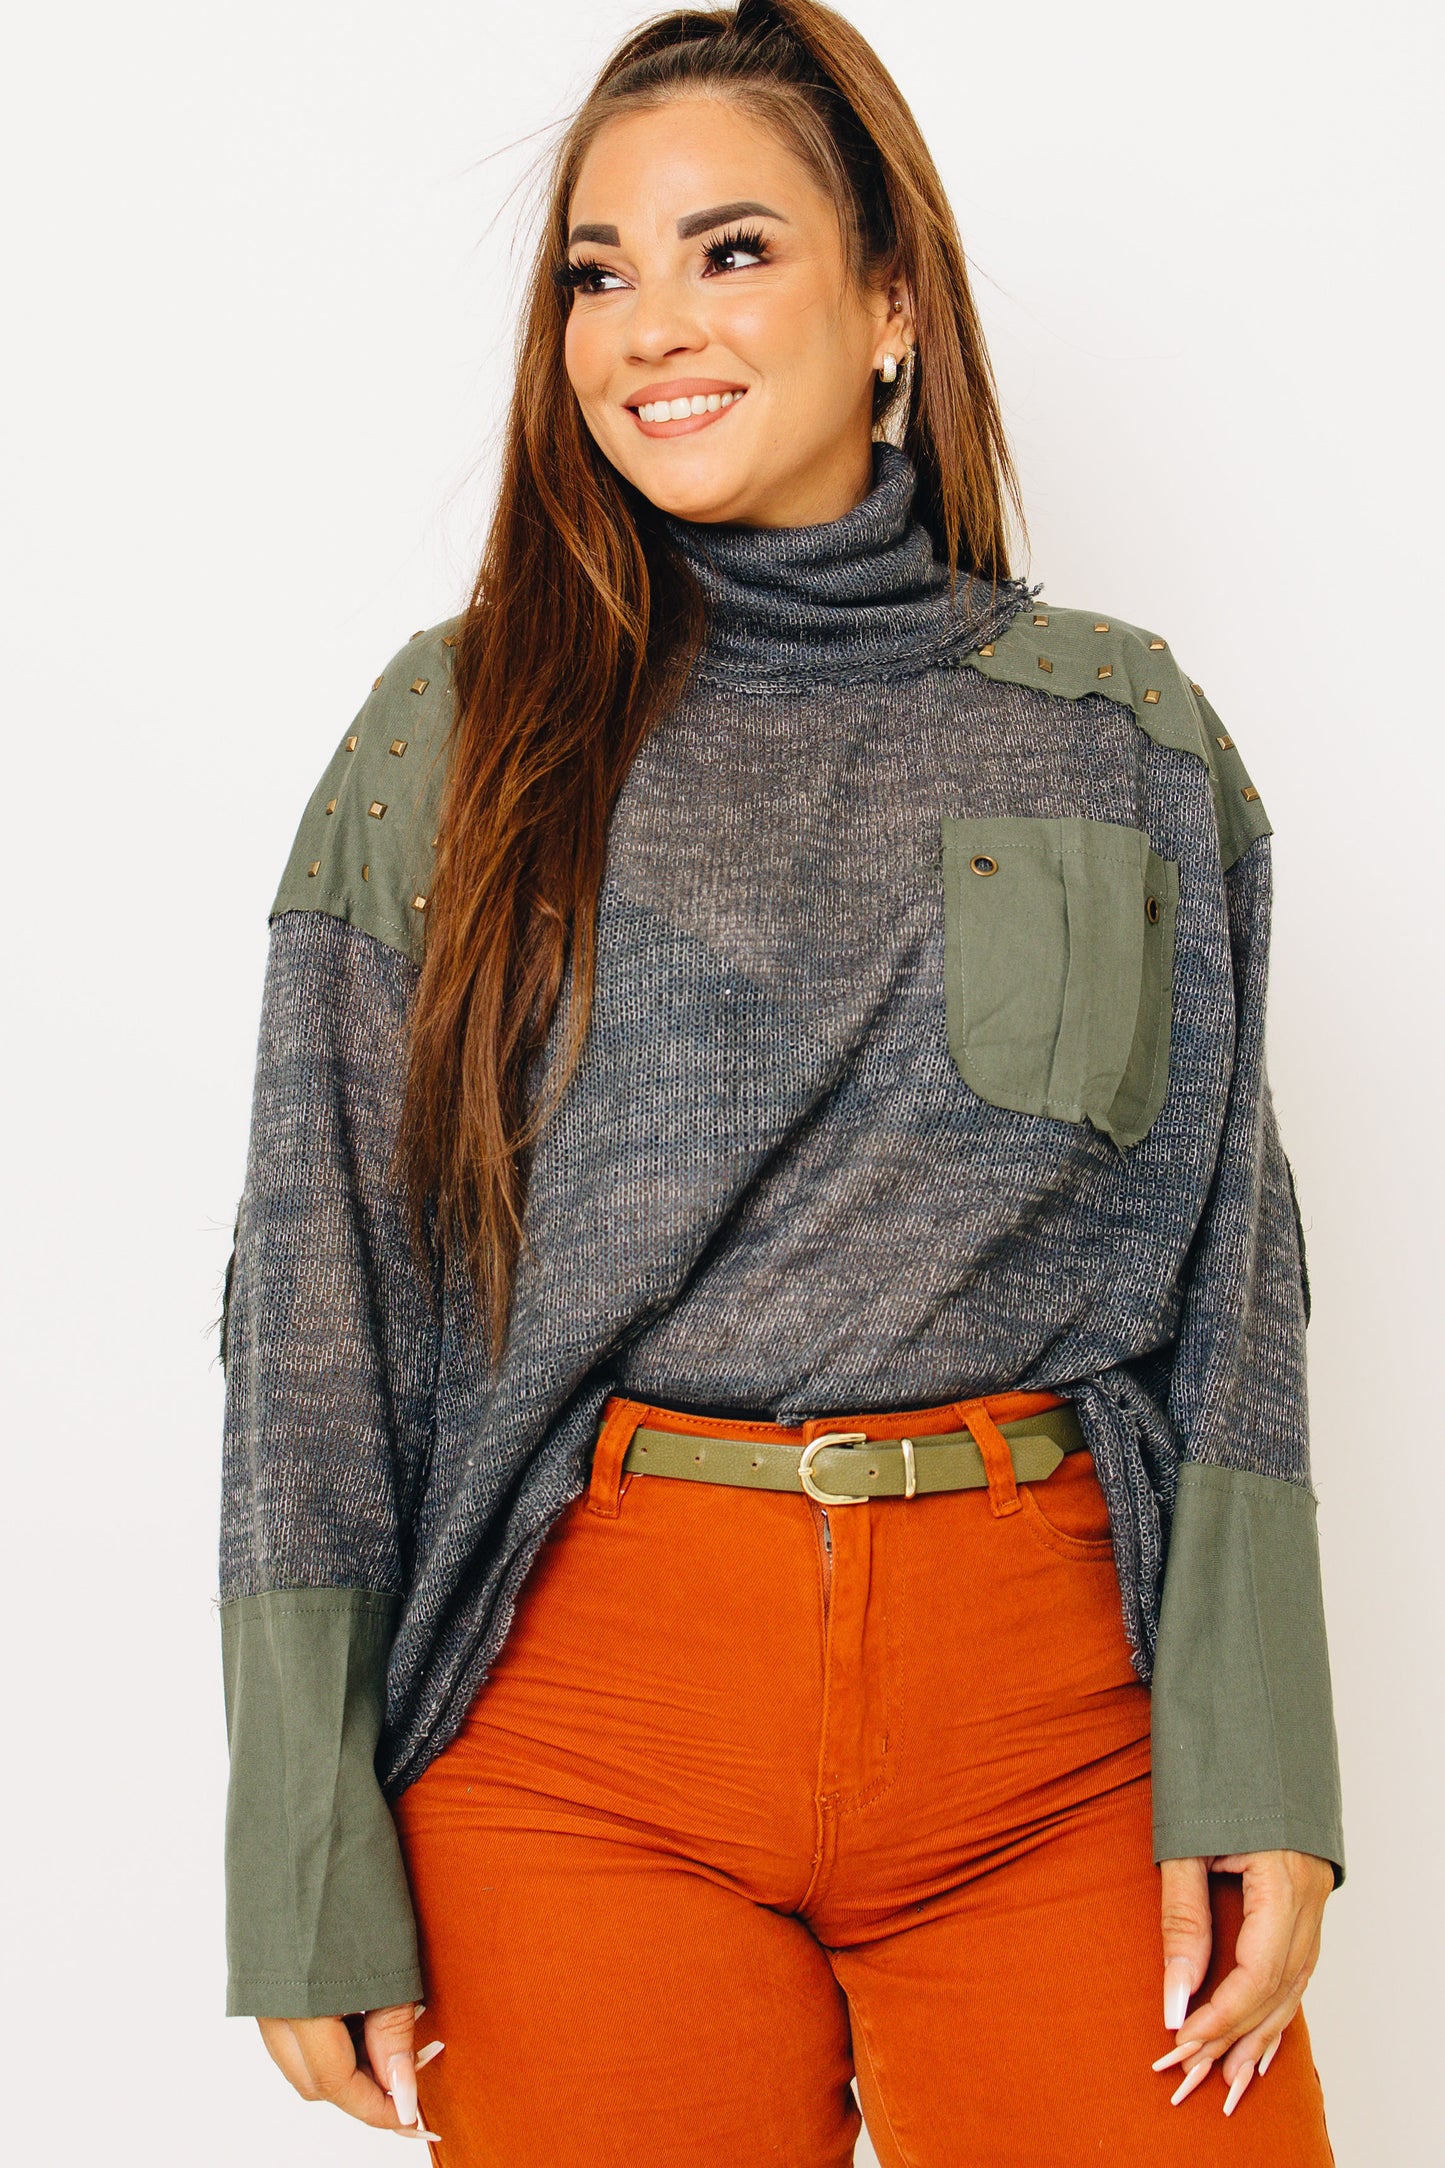 Pol - Studded Turtle Neck Knit Sweater Top (S-L)